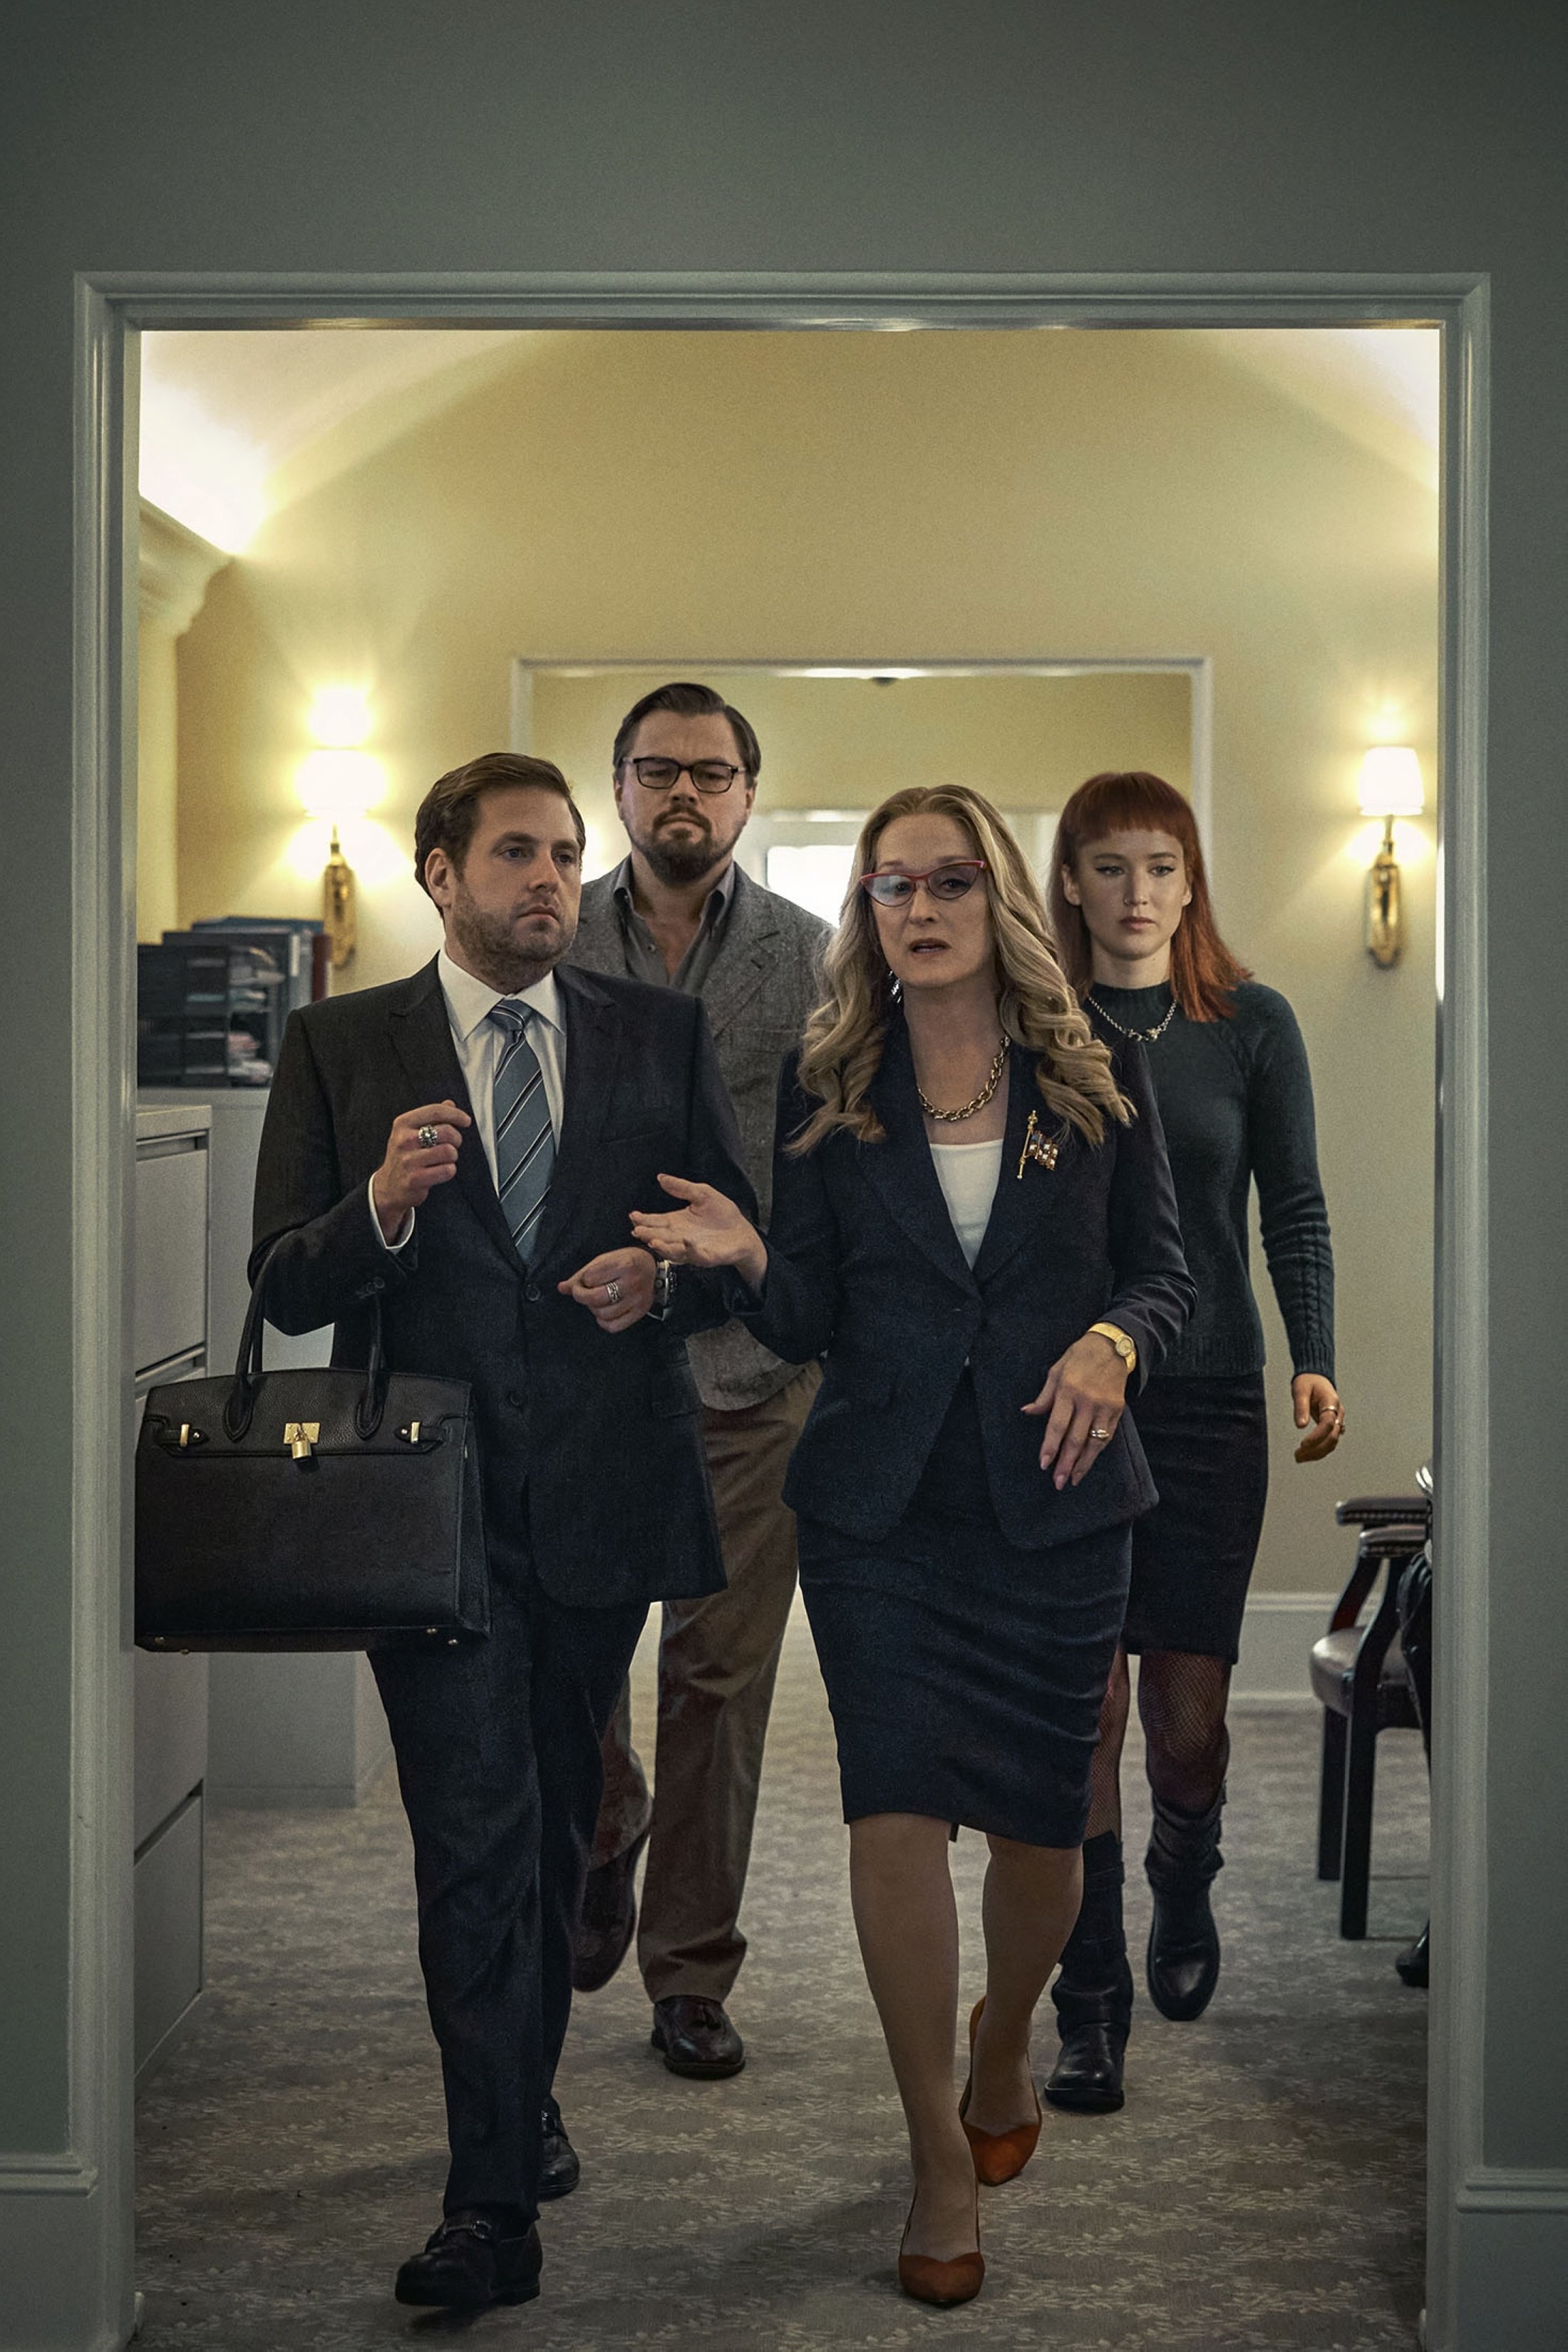 Jonah Hill (L) as Jason Orlean, Leonardo DiCaprio (C-L) as Dr. Randall Mindy, Meryl Streep (C-R) as President Janie Orlean and Jennifer Lawrence as Kate Dibiasky, in a scene from the film “Don't Look Up.” (Netflix via AP)